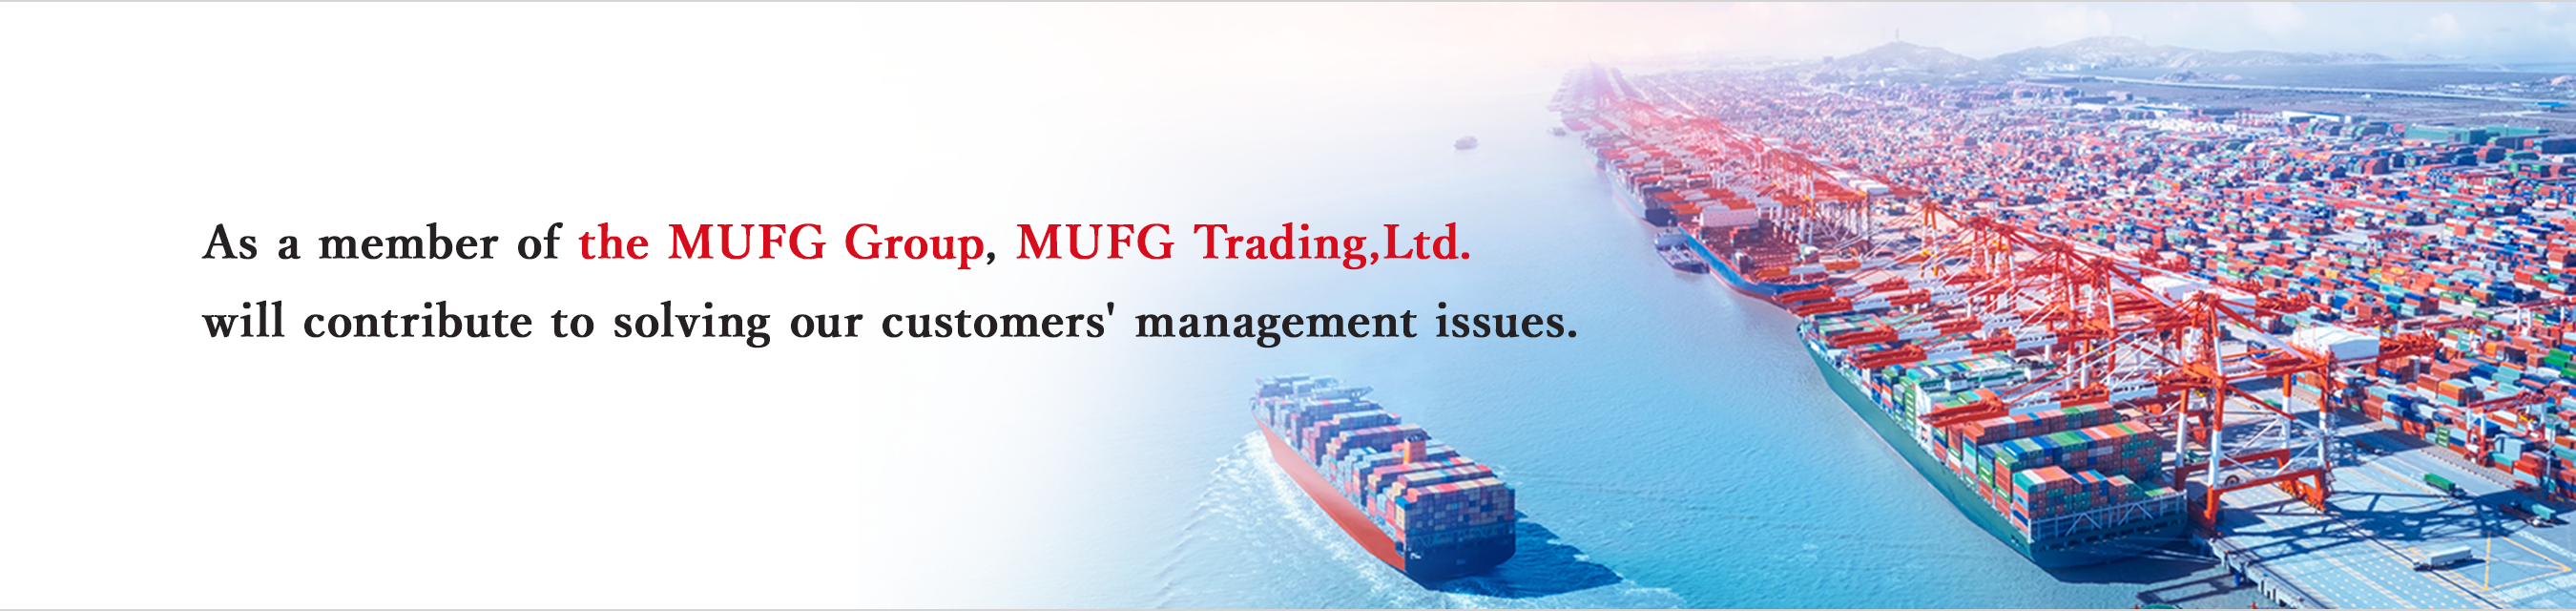 As a member of the MUFG Group,MUFG Trading,Ltd.will contribute to solving our customer's management issues.